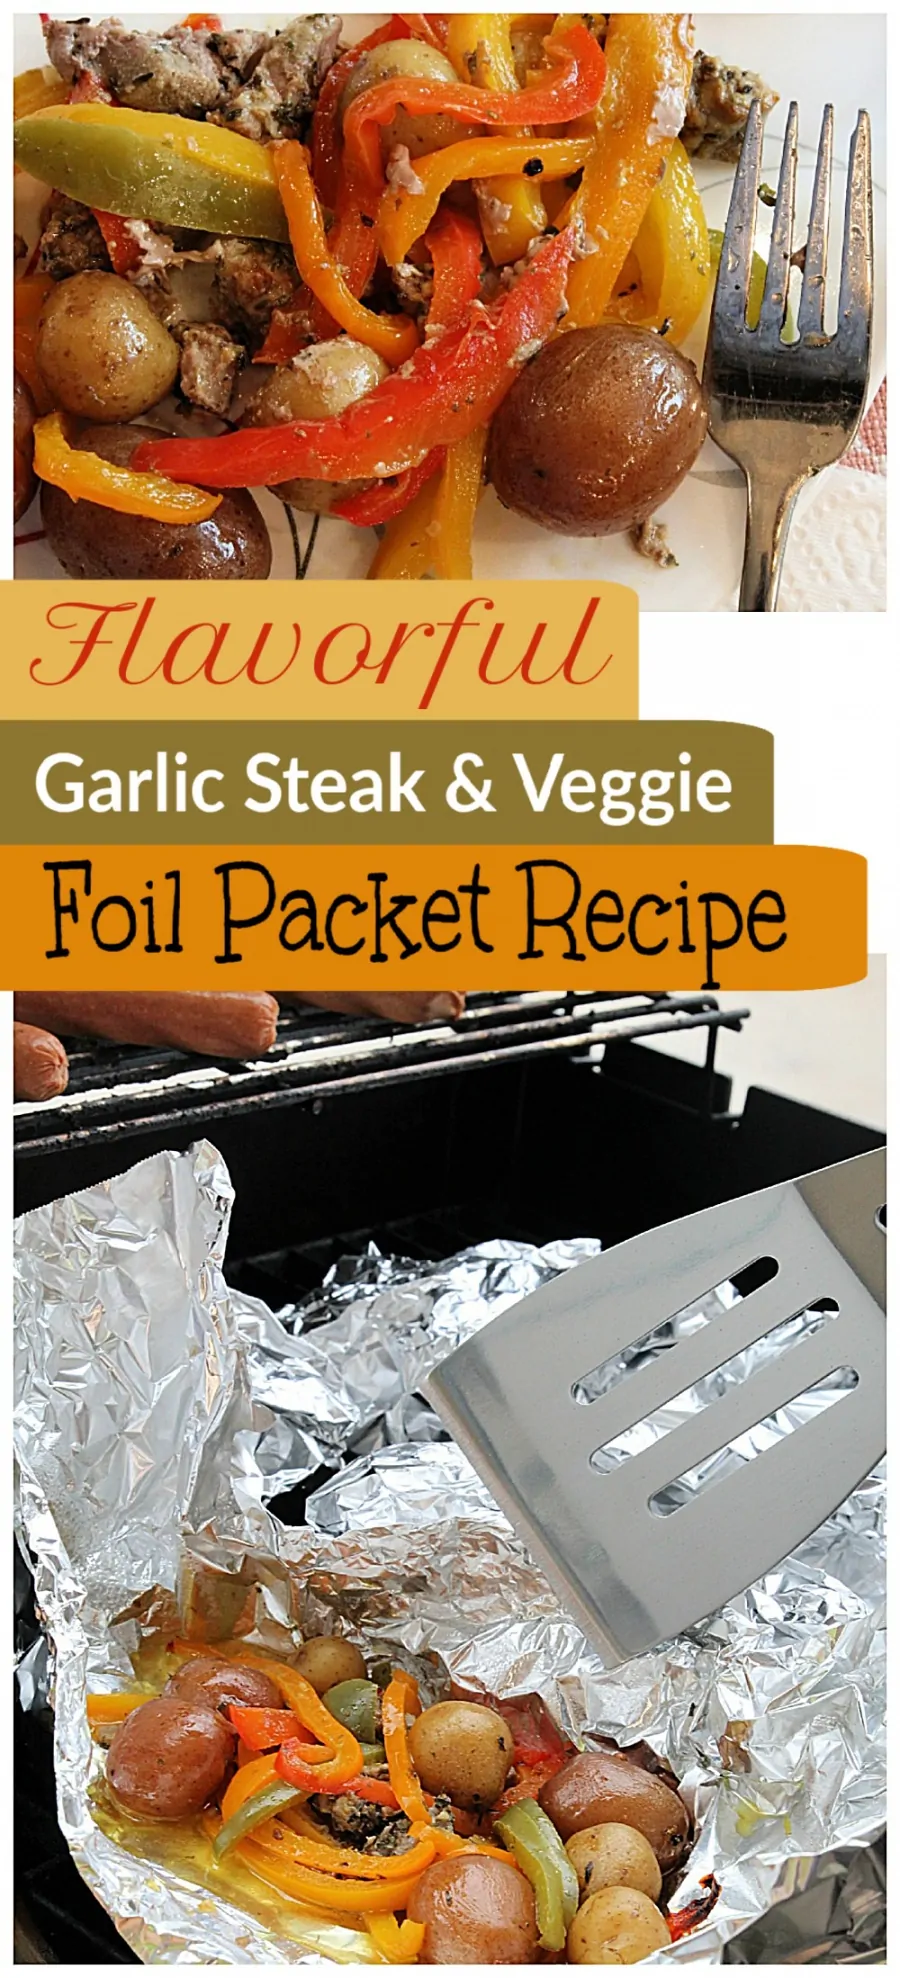 Flavorful Garlic Steak And Veggies Foil Packet Grill Meal Recipe